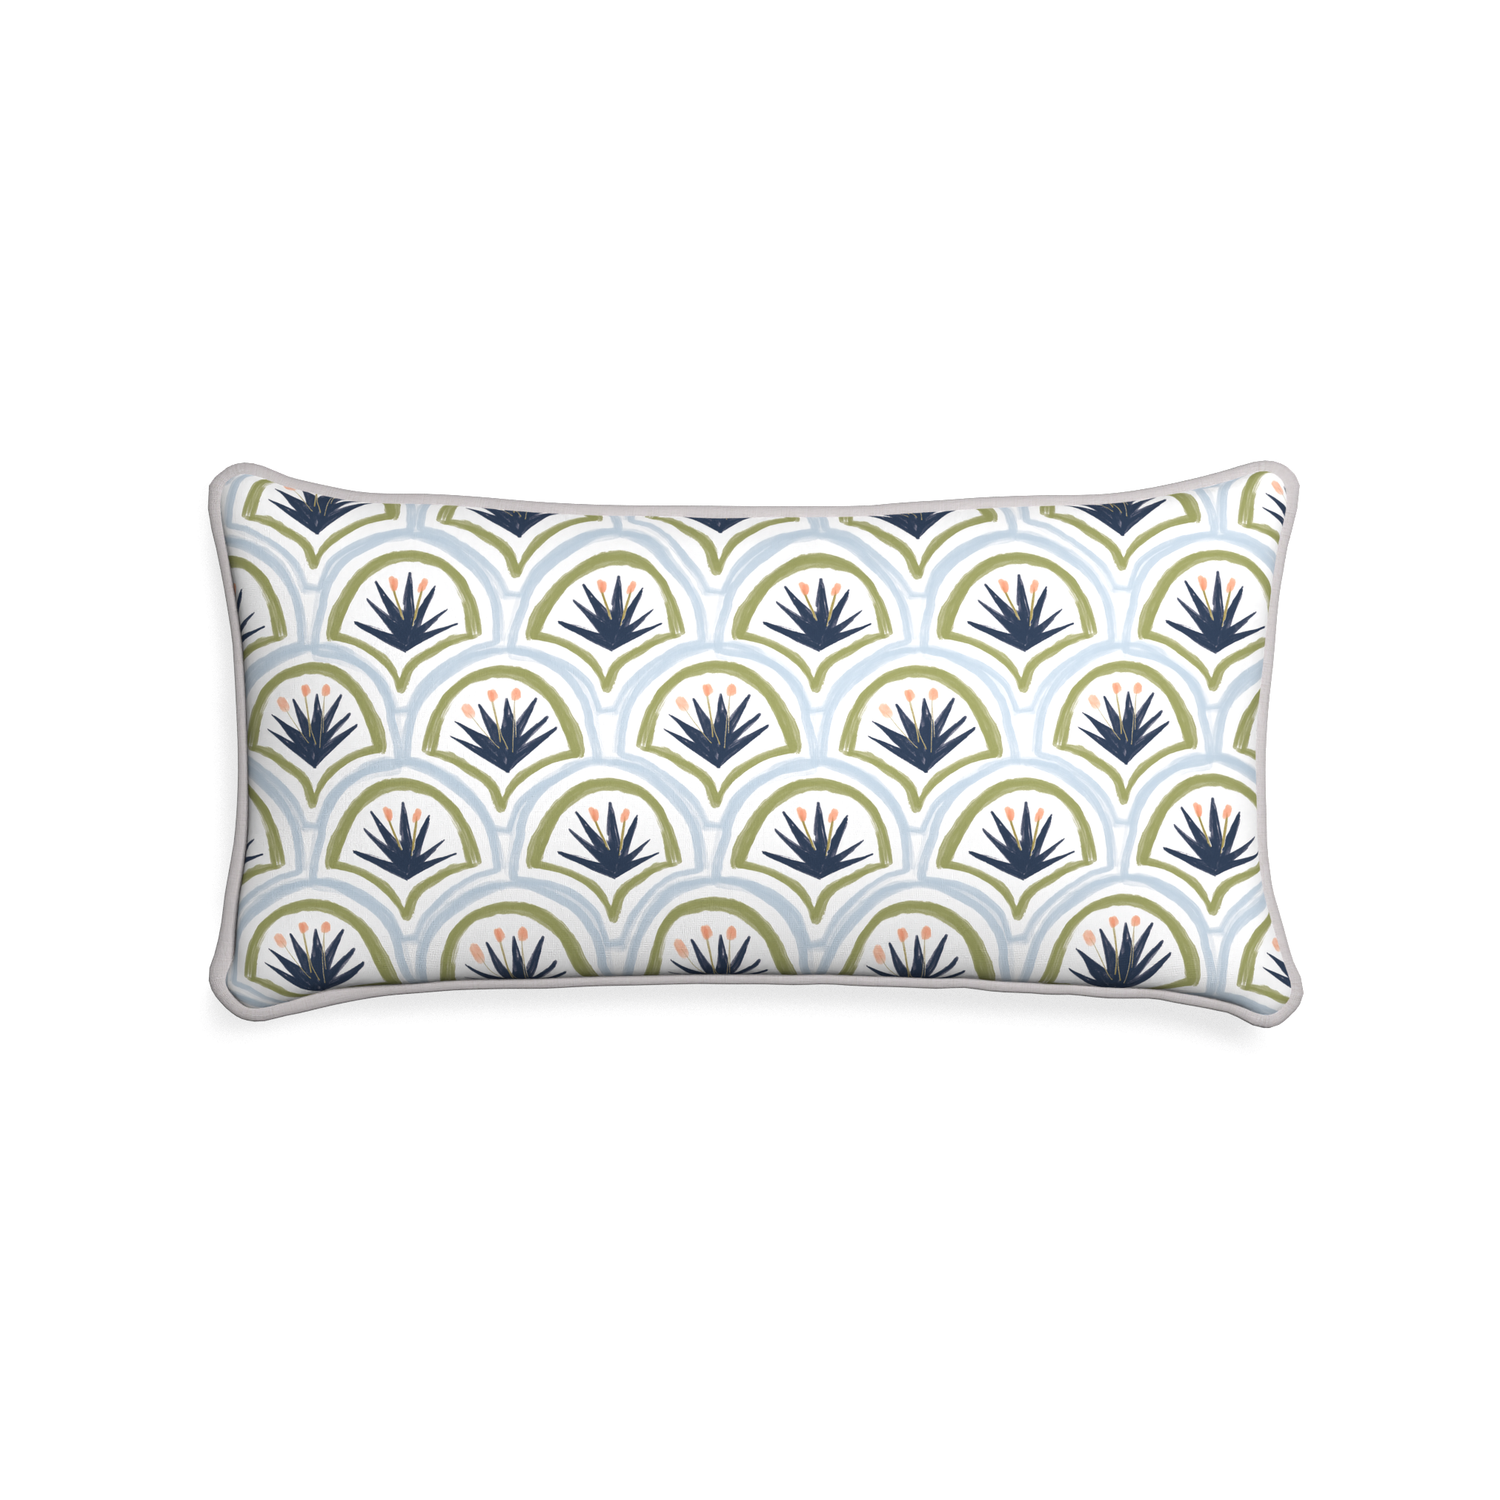 Midi-lumbar thatcher midnight custom art deco palm patternpillow with pebble piping on white background